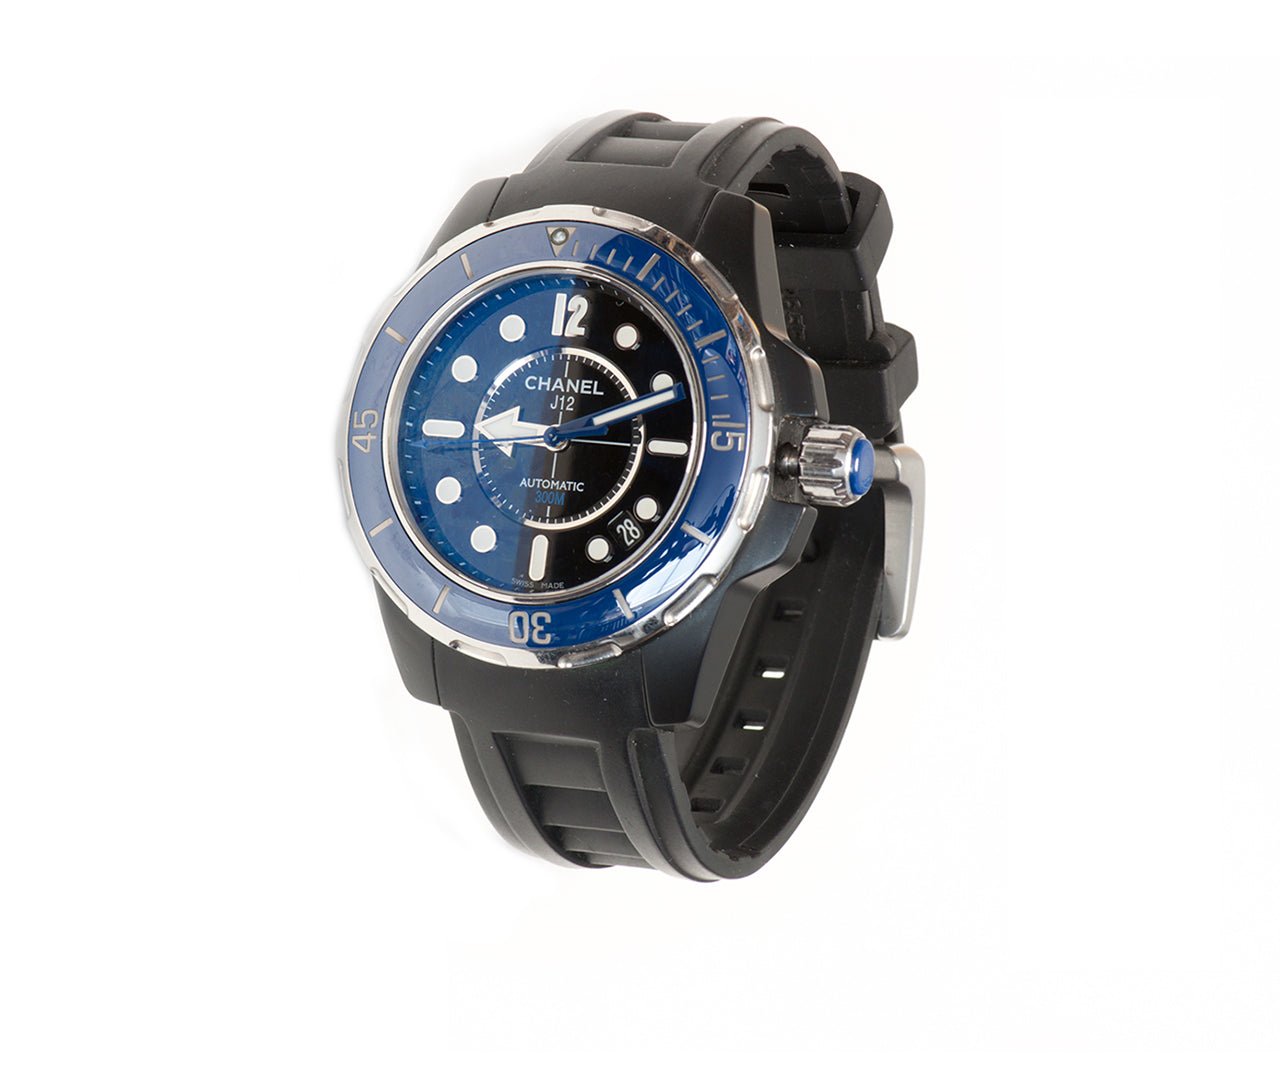 Chanel J12 Marine Automatic Men's Watch - DSF Antique Jewelry